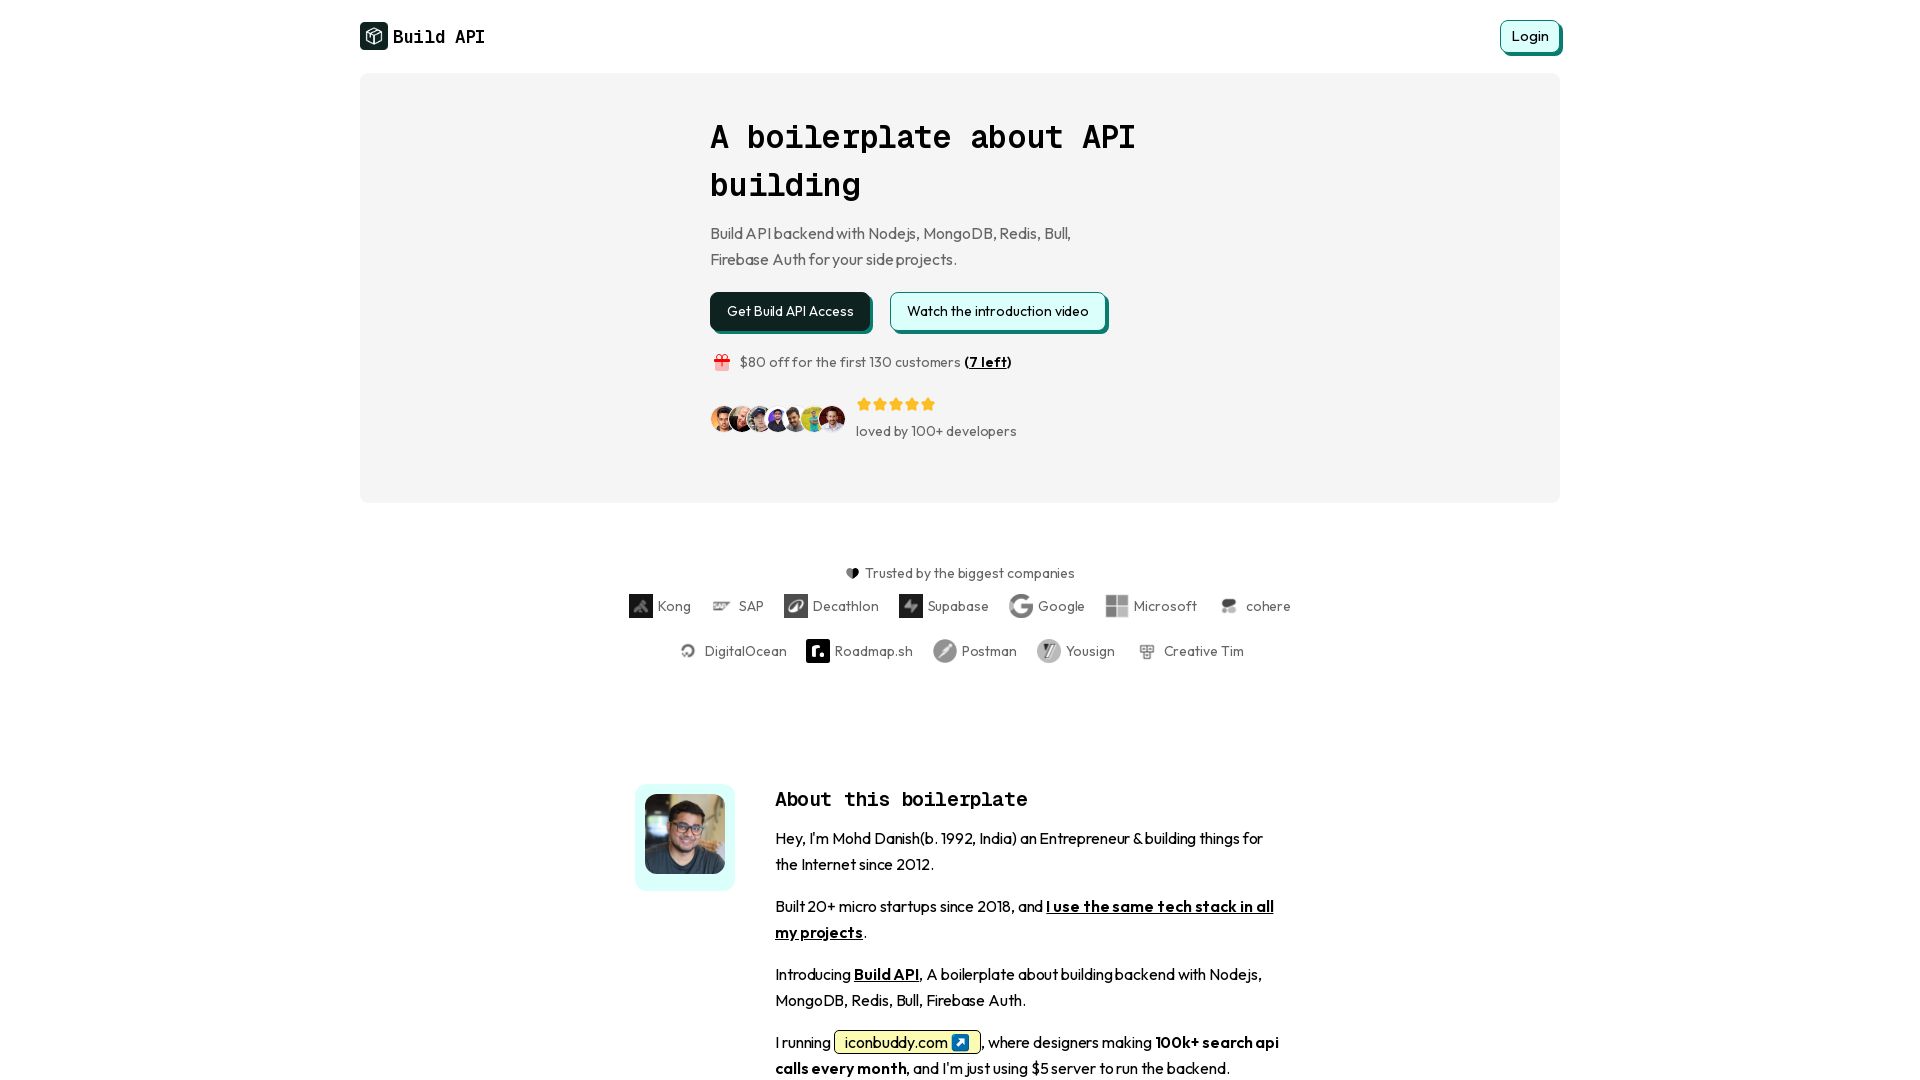 Build API — A boilerplate for your backend